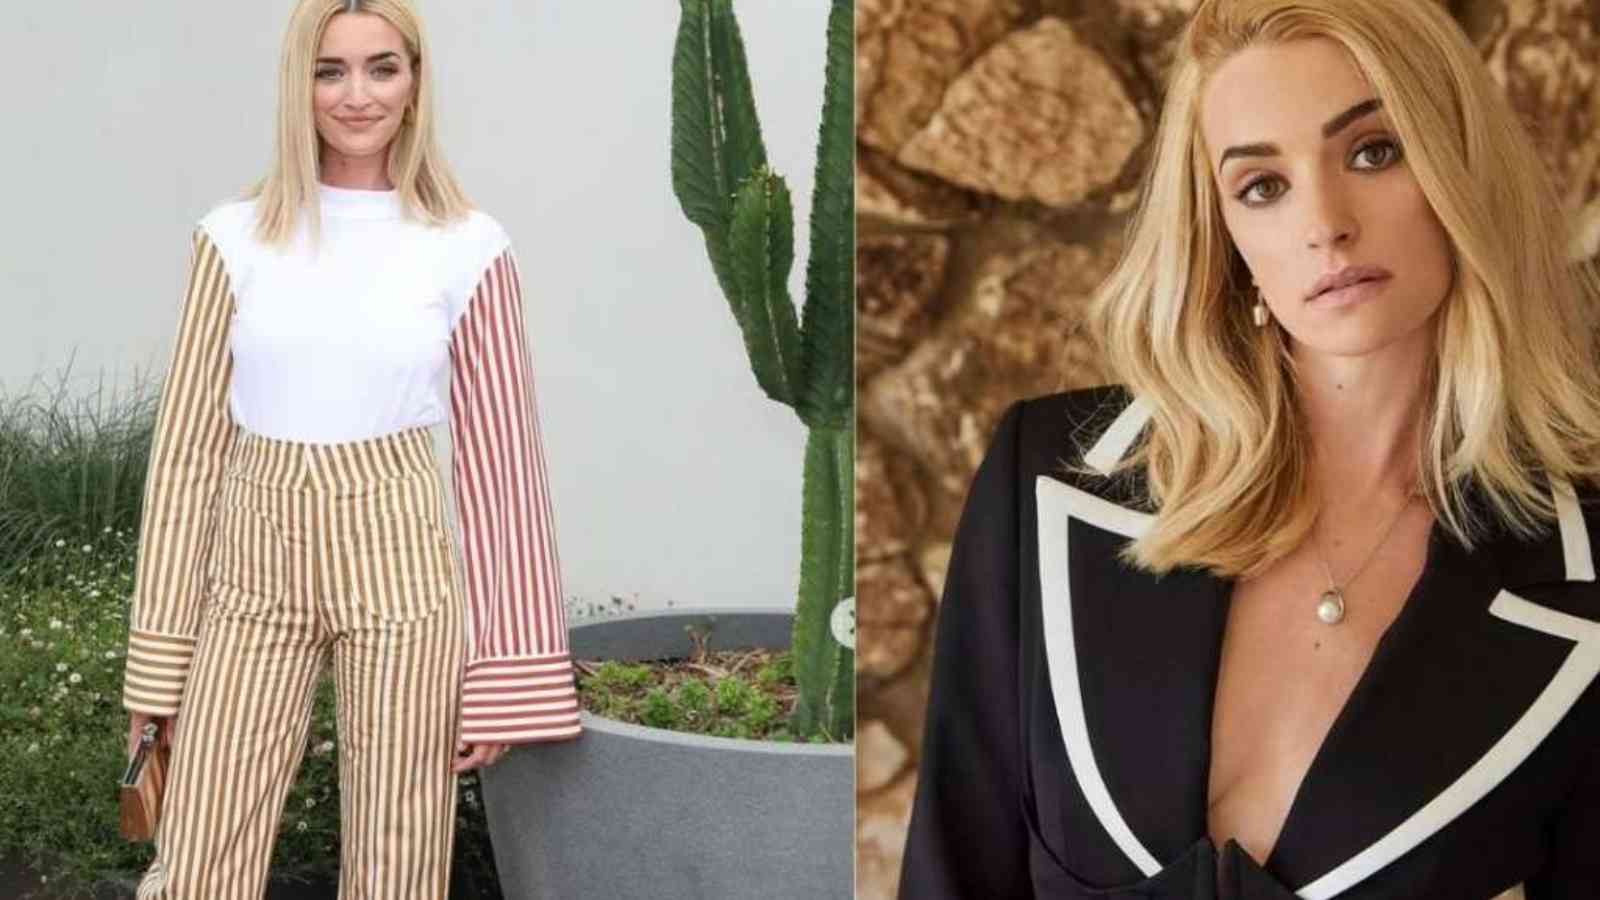 Brianne Howey Weight Loss: Why Does Brianne Look So Skinny?